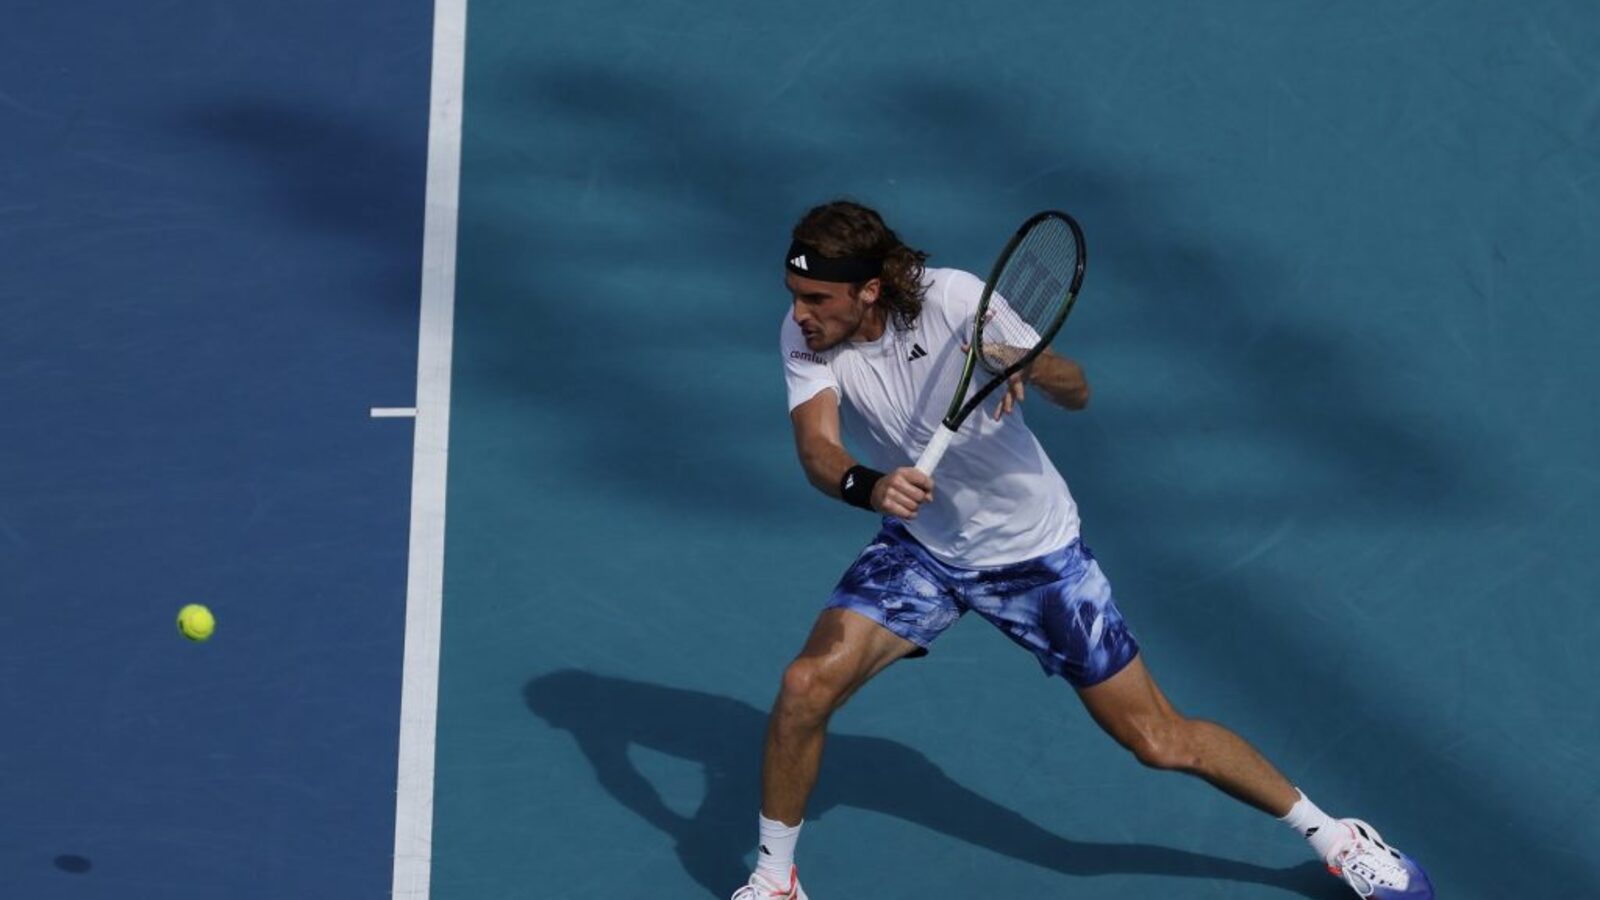 Is Stefanos Tsitsipas’ Best Tennis in the Past?